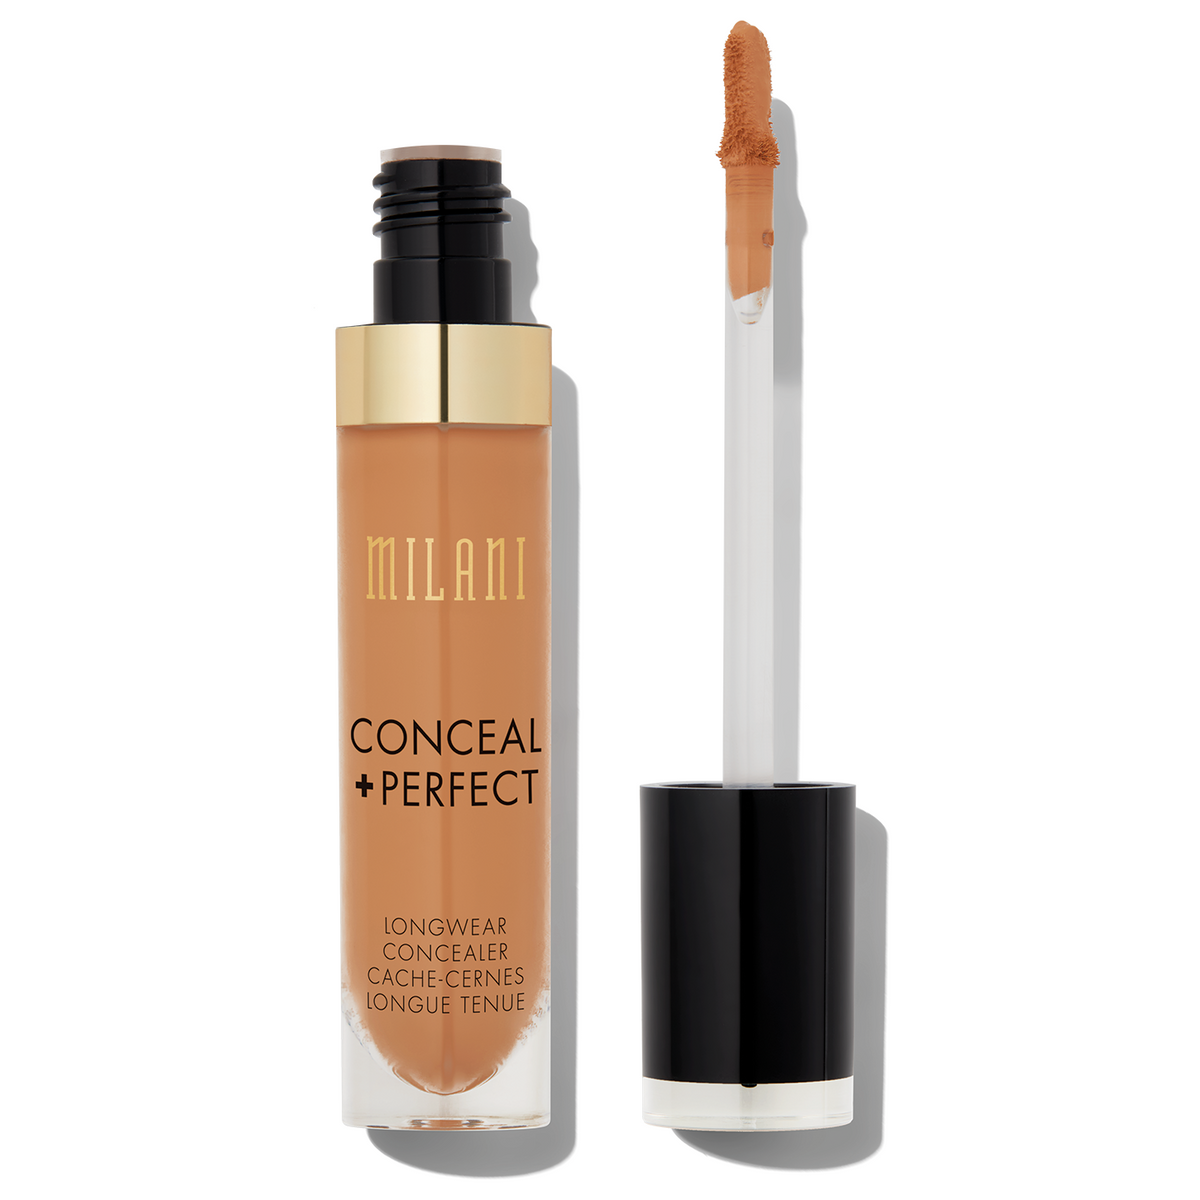 MILANI Conceal + Perfect Long-Wear Concealer - Cool Sand #155